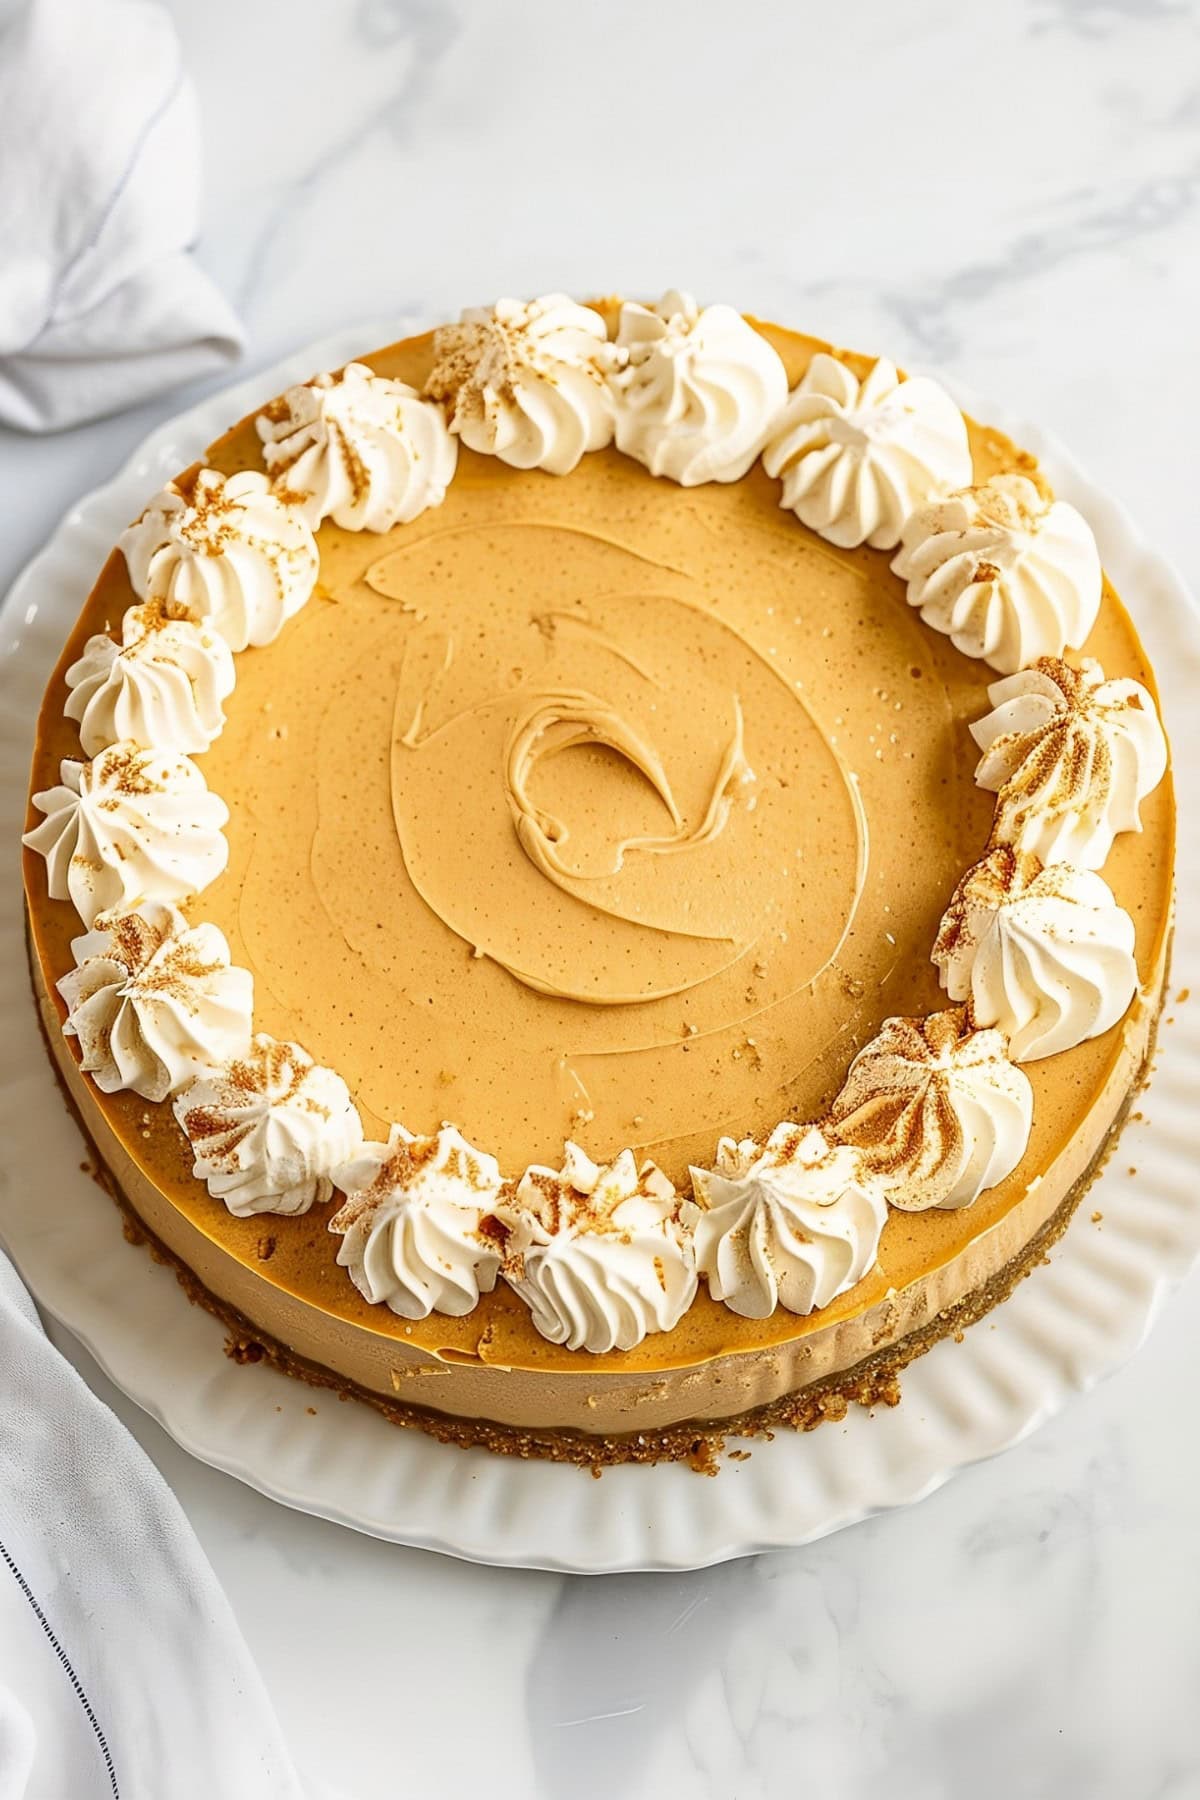 Creamy no-bake pumpkin cheesecake, a deliciously easy dessert perfect for fall gatherings